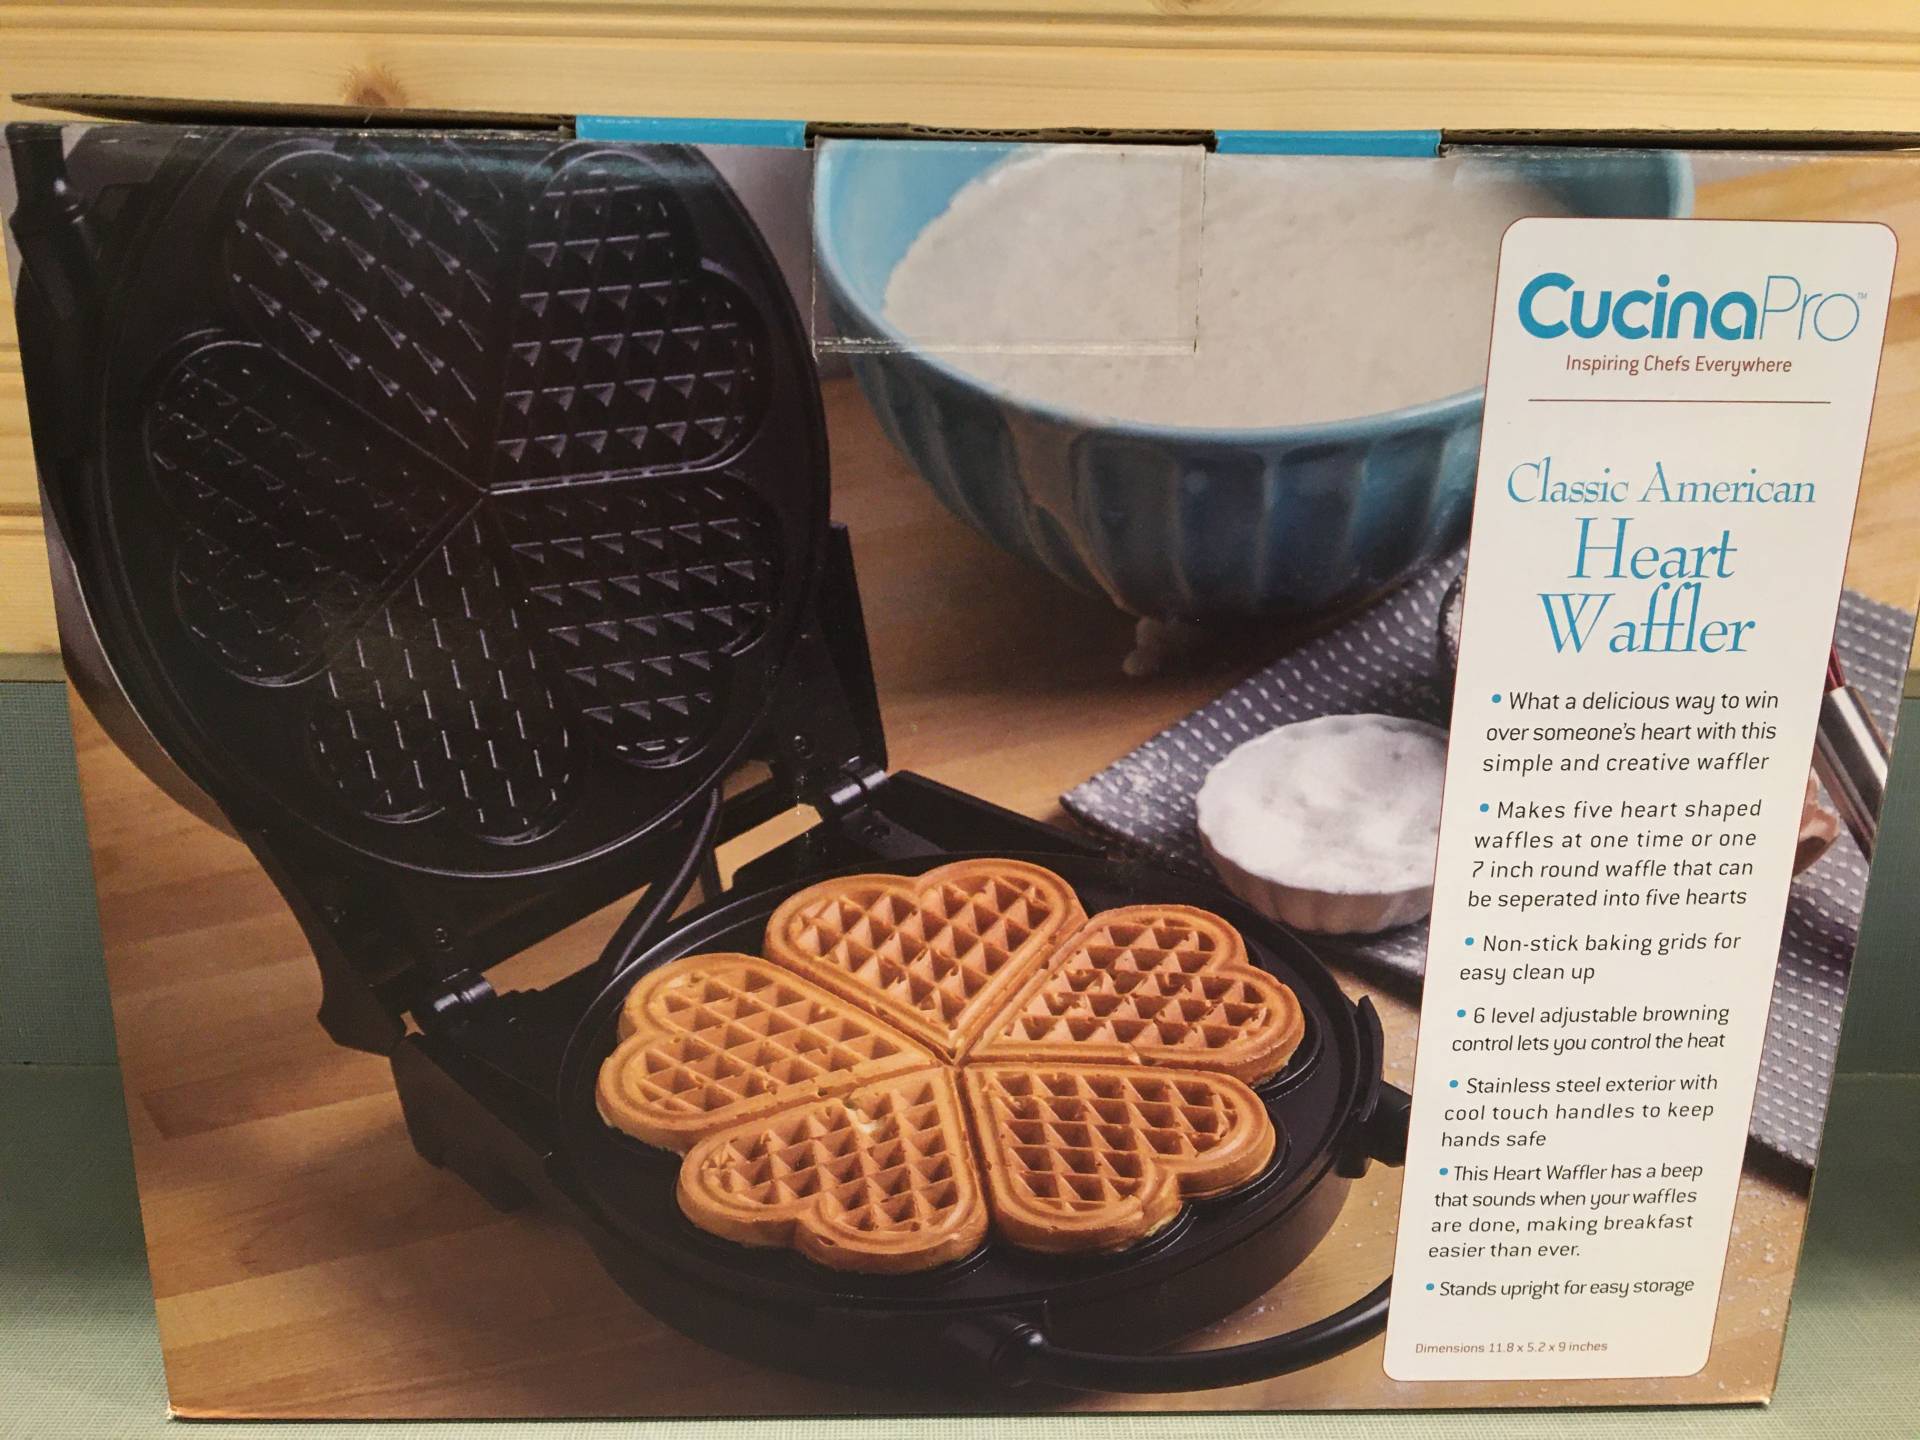 Valentines Day Heart Waffle Maker - Make 5 Heart-Shaped Waffles for Special  Breakfast- Nonstick Baker for Easy Cleanup, Electric Waffler Griddle Iron